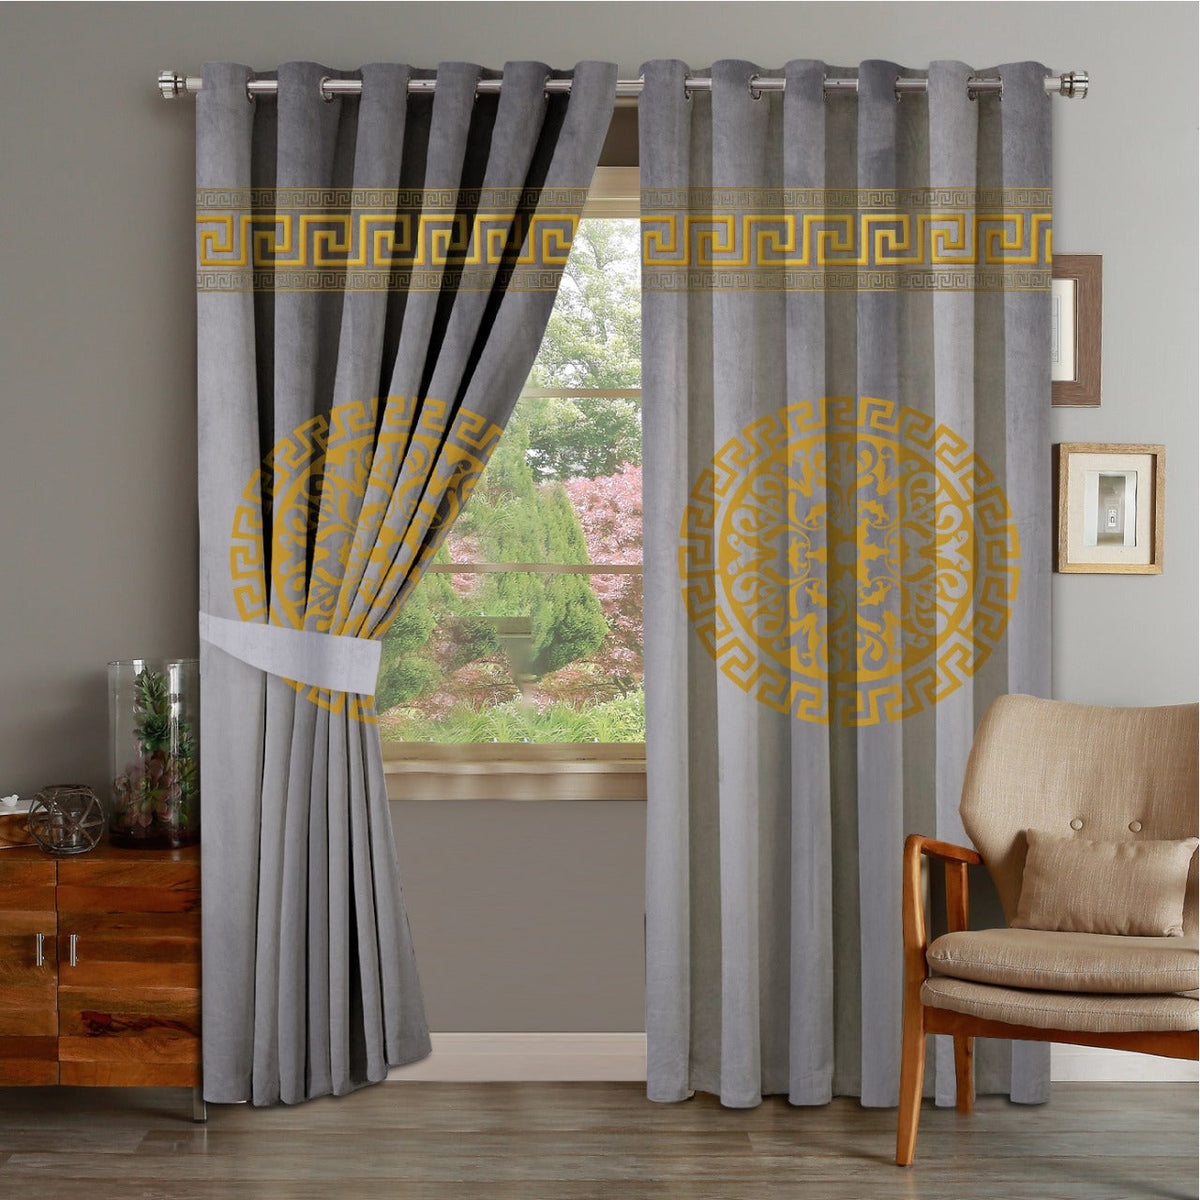 2 PIECE OF PREMIUM VELVET CURTAINS WITH 2 BELTS (LIGHT GRAY&GOLD)